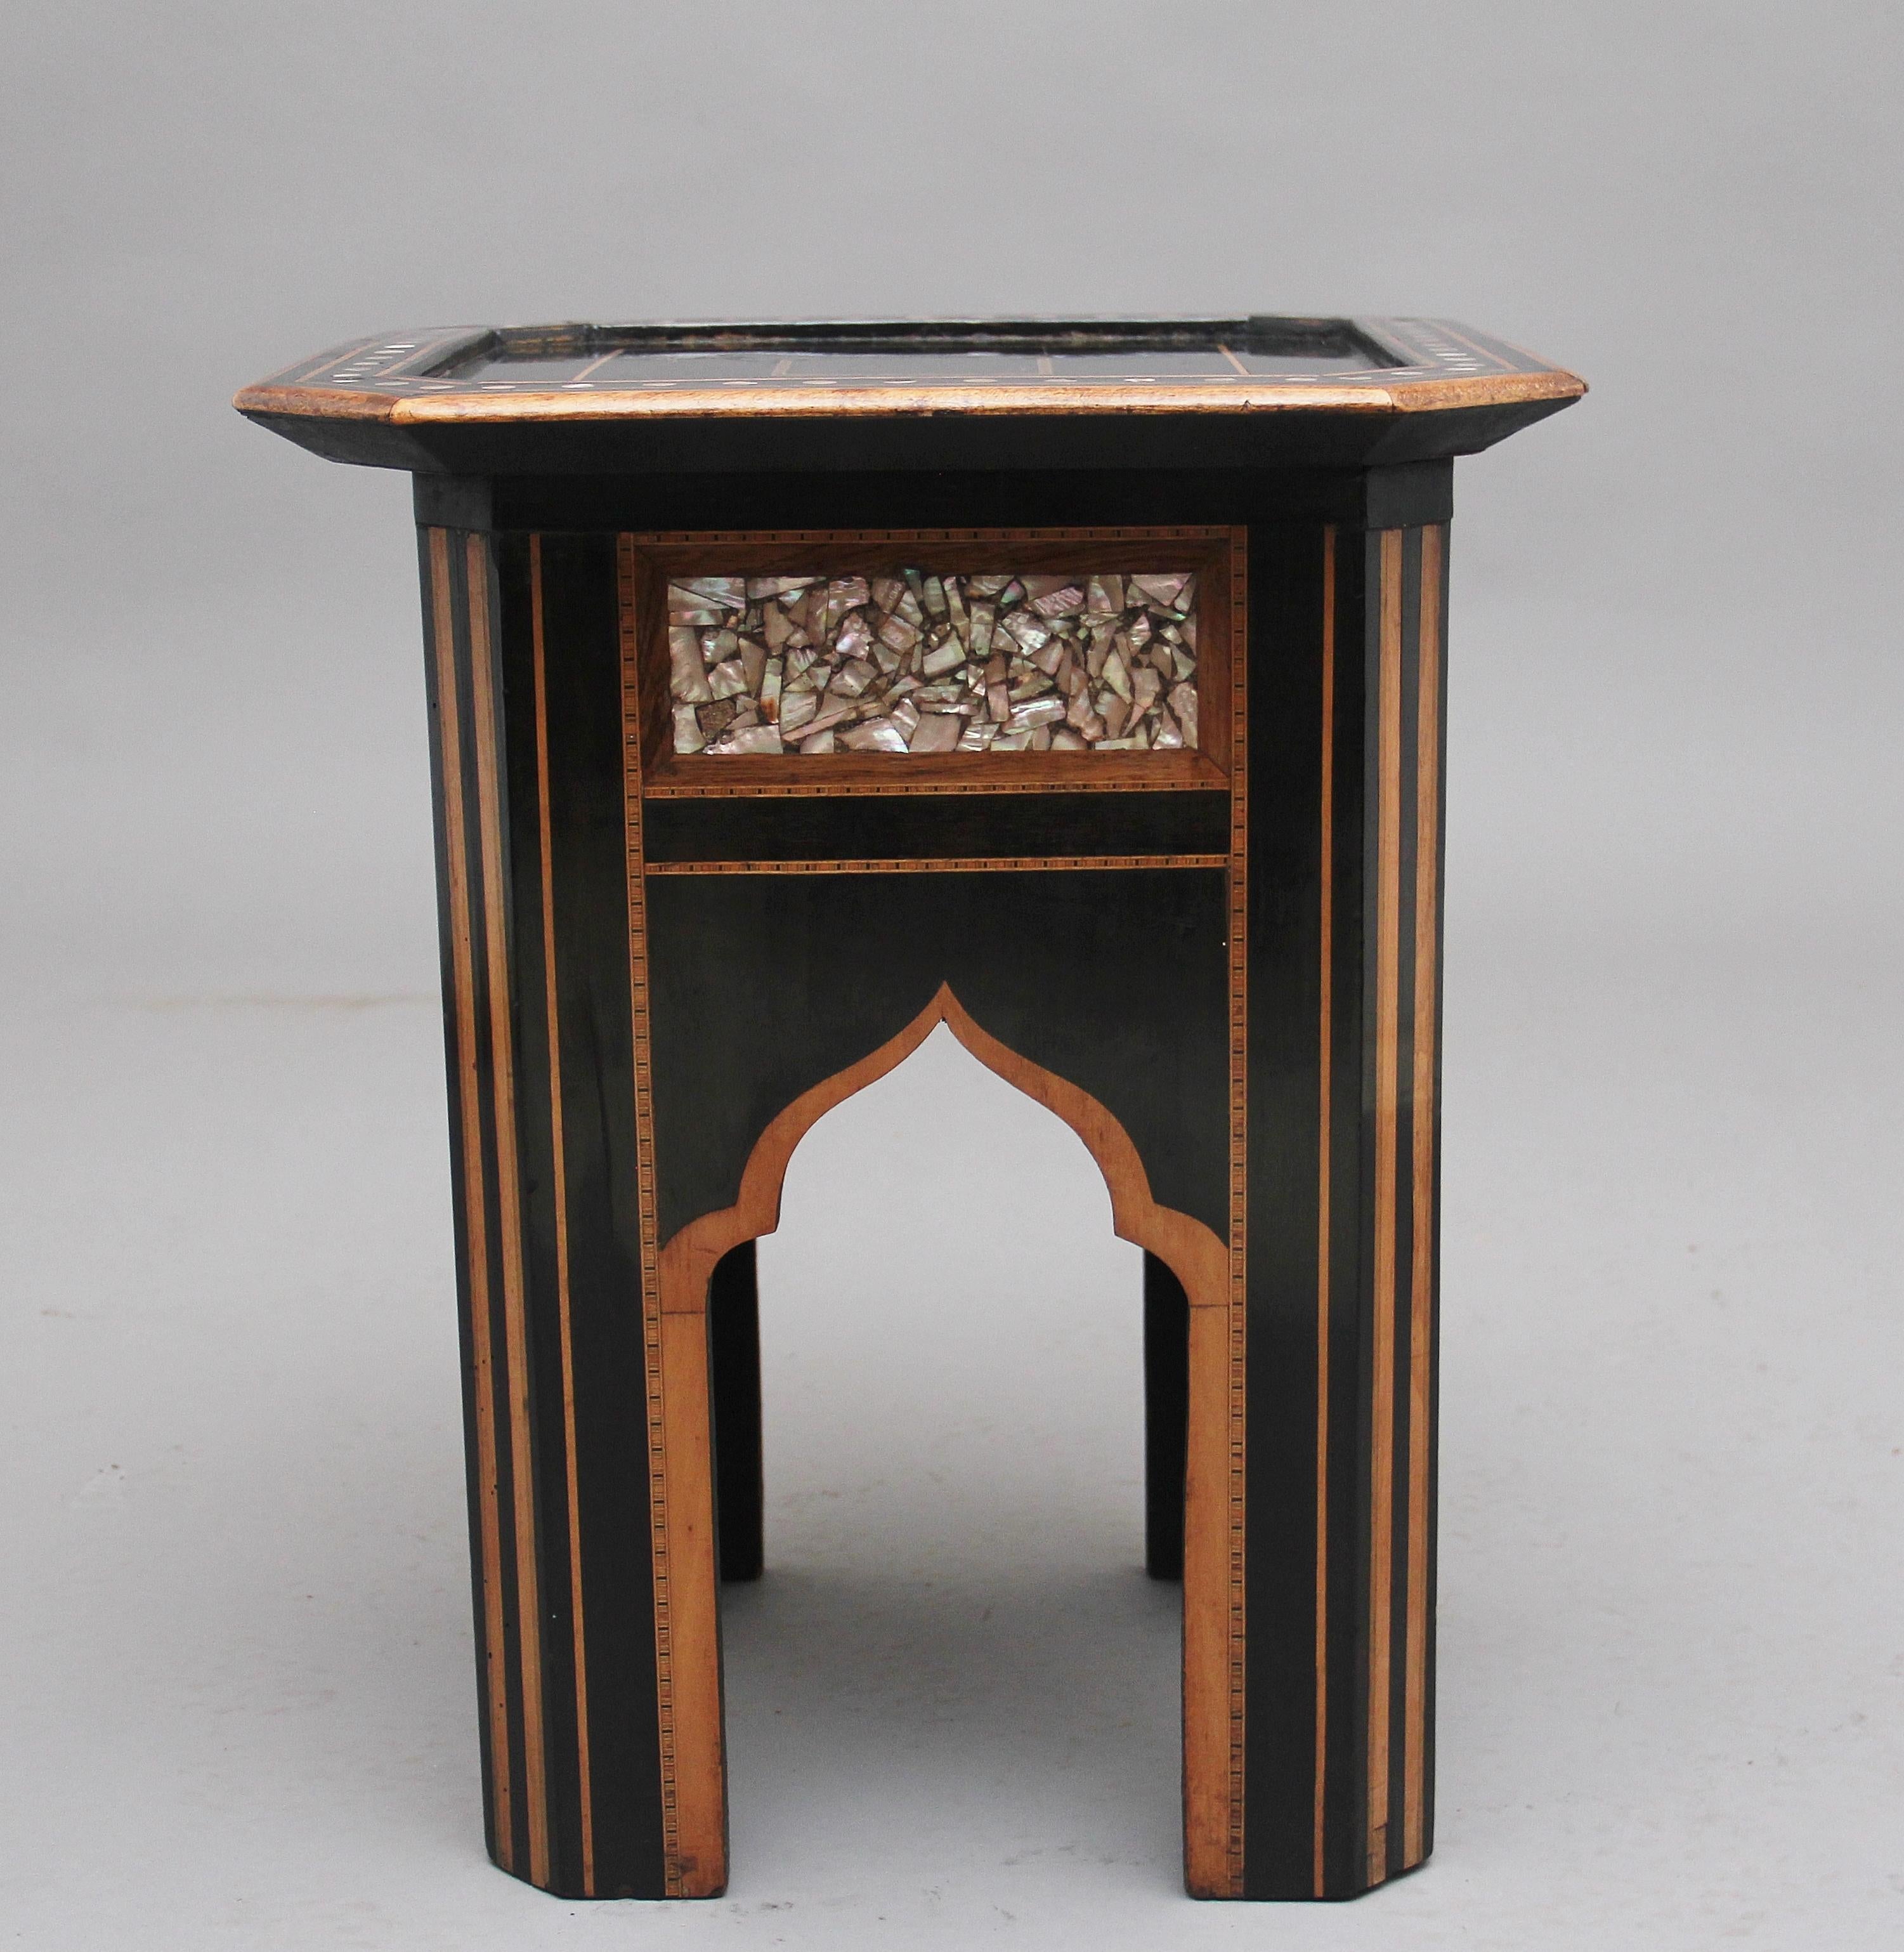 A highly decorative 19th century inlaid occasional table made from ebony and other exotic woods, the square tray top with cut corners inlaid throughout the top and having circular inlay of mother of pearl, each side of the table having rectangular